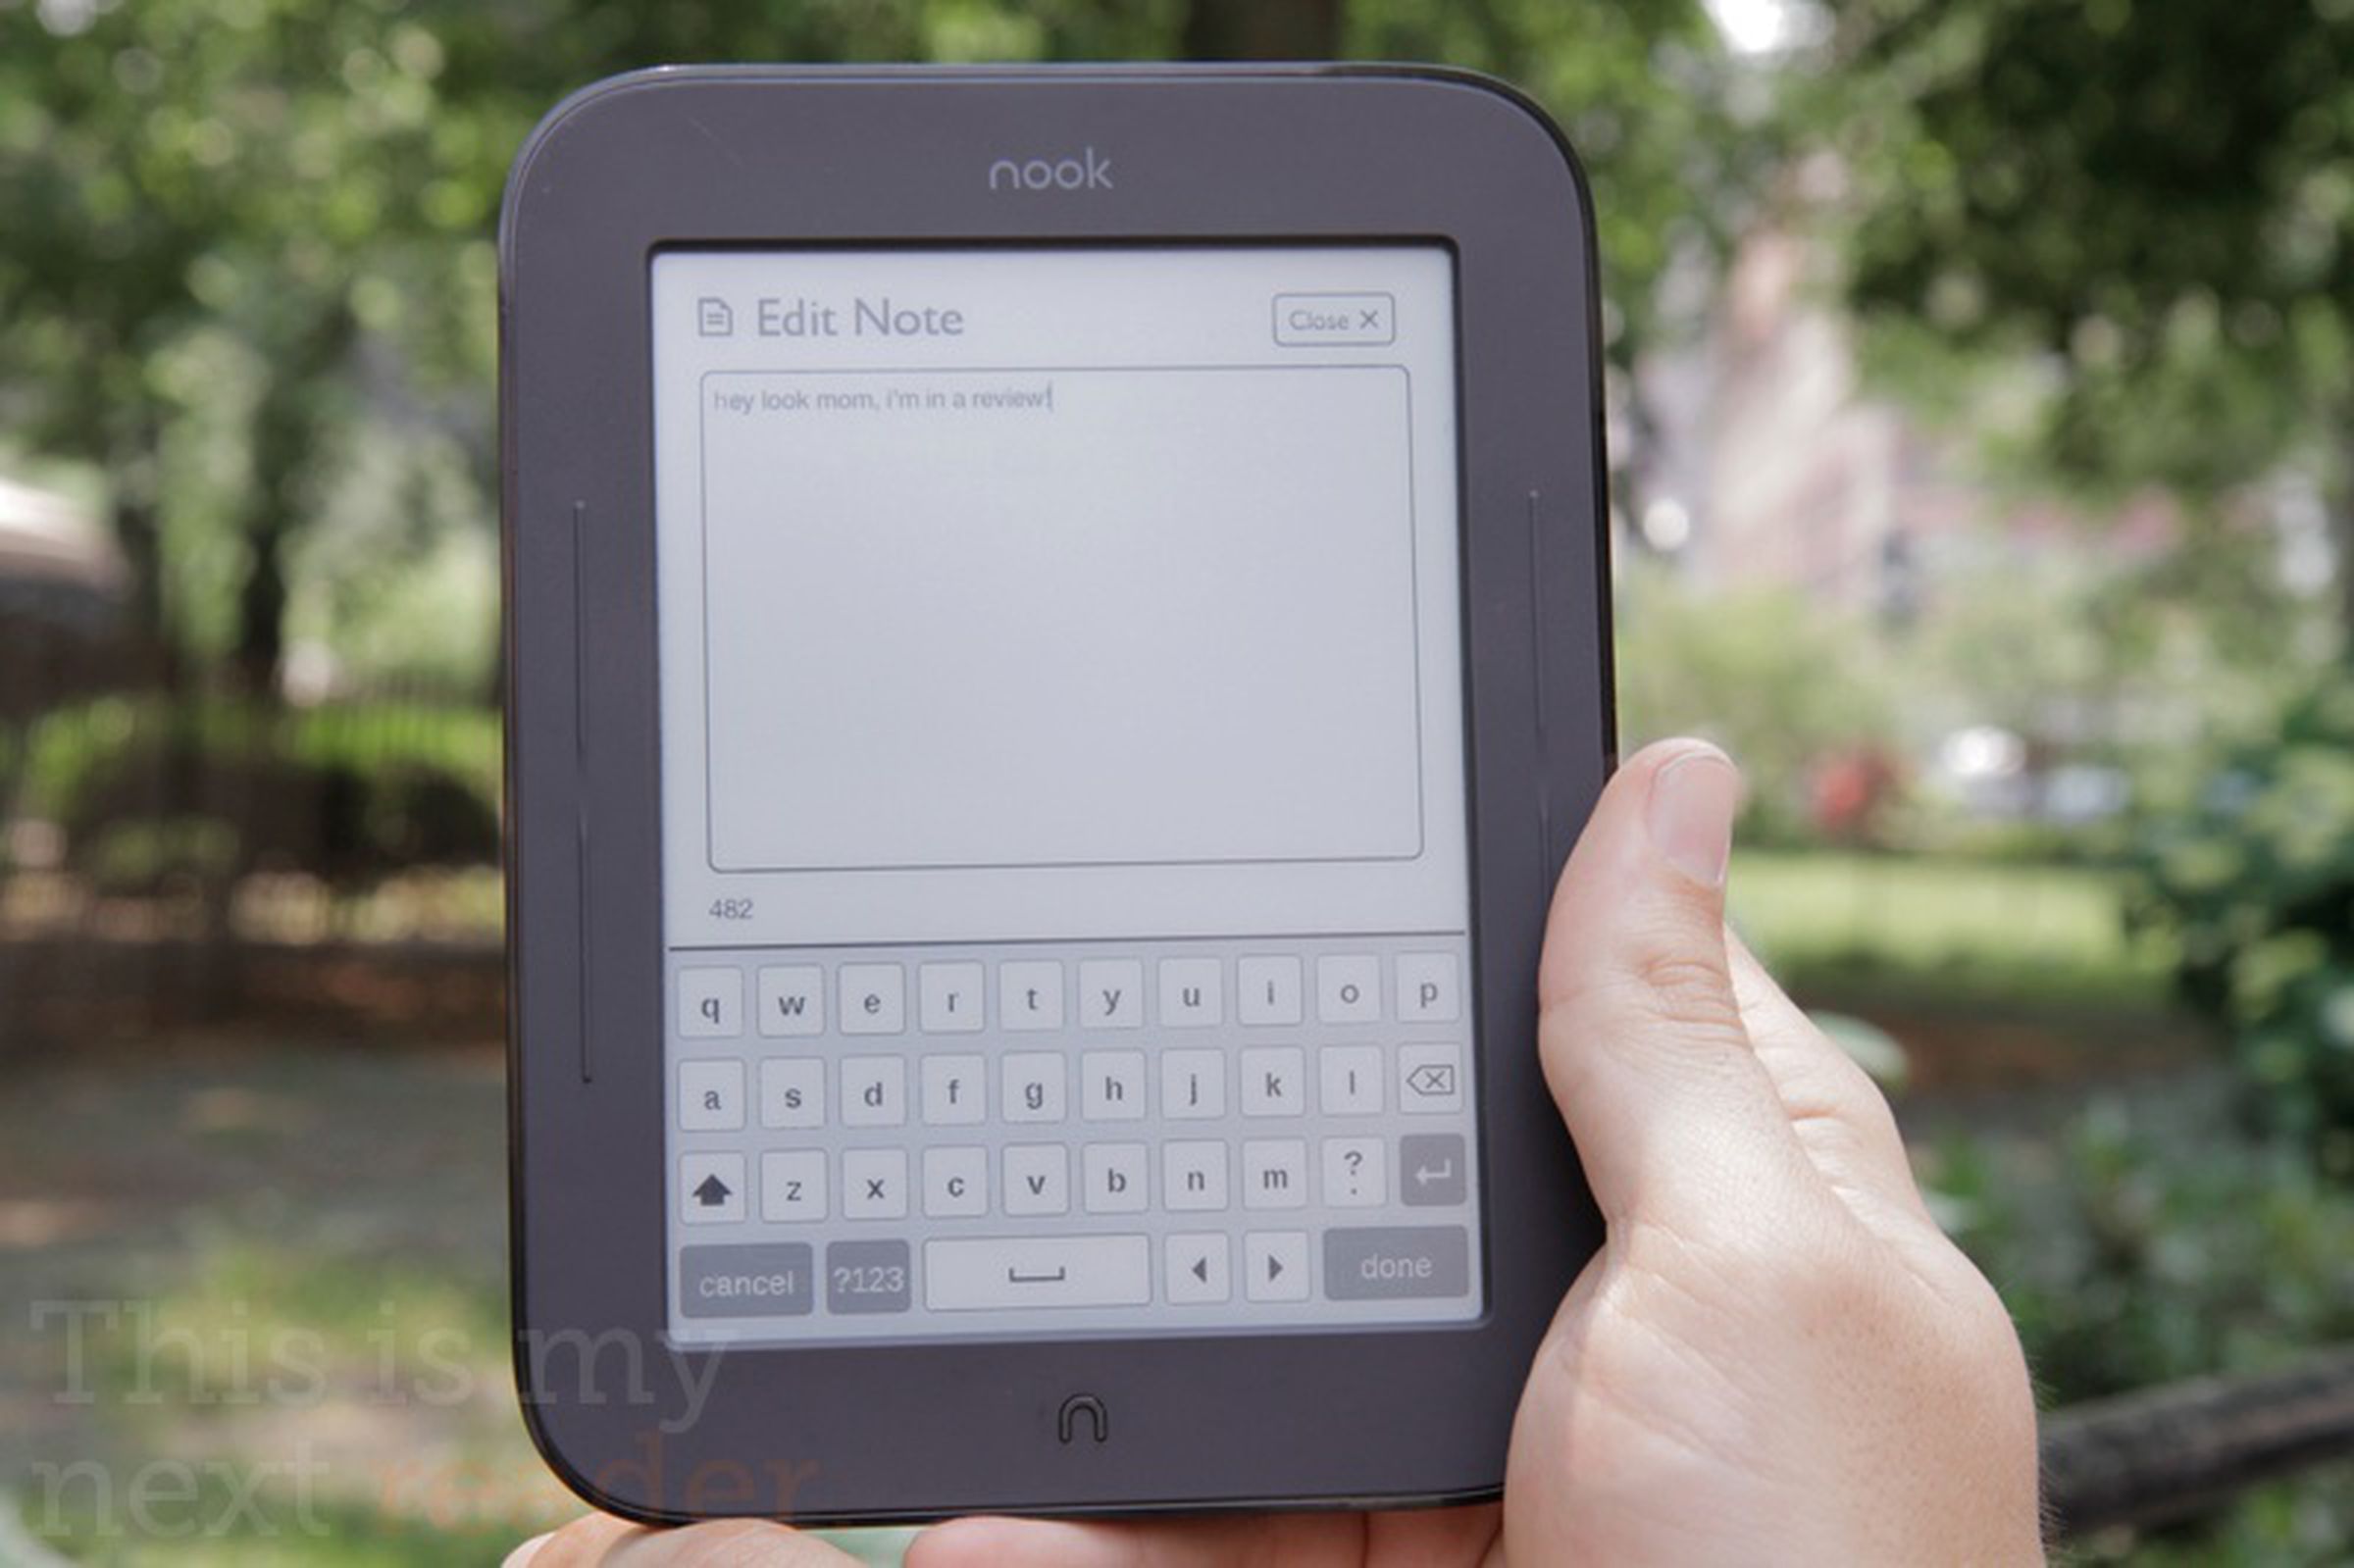 Barnes & Noble Nook review pictures